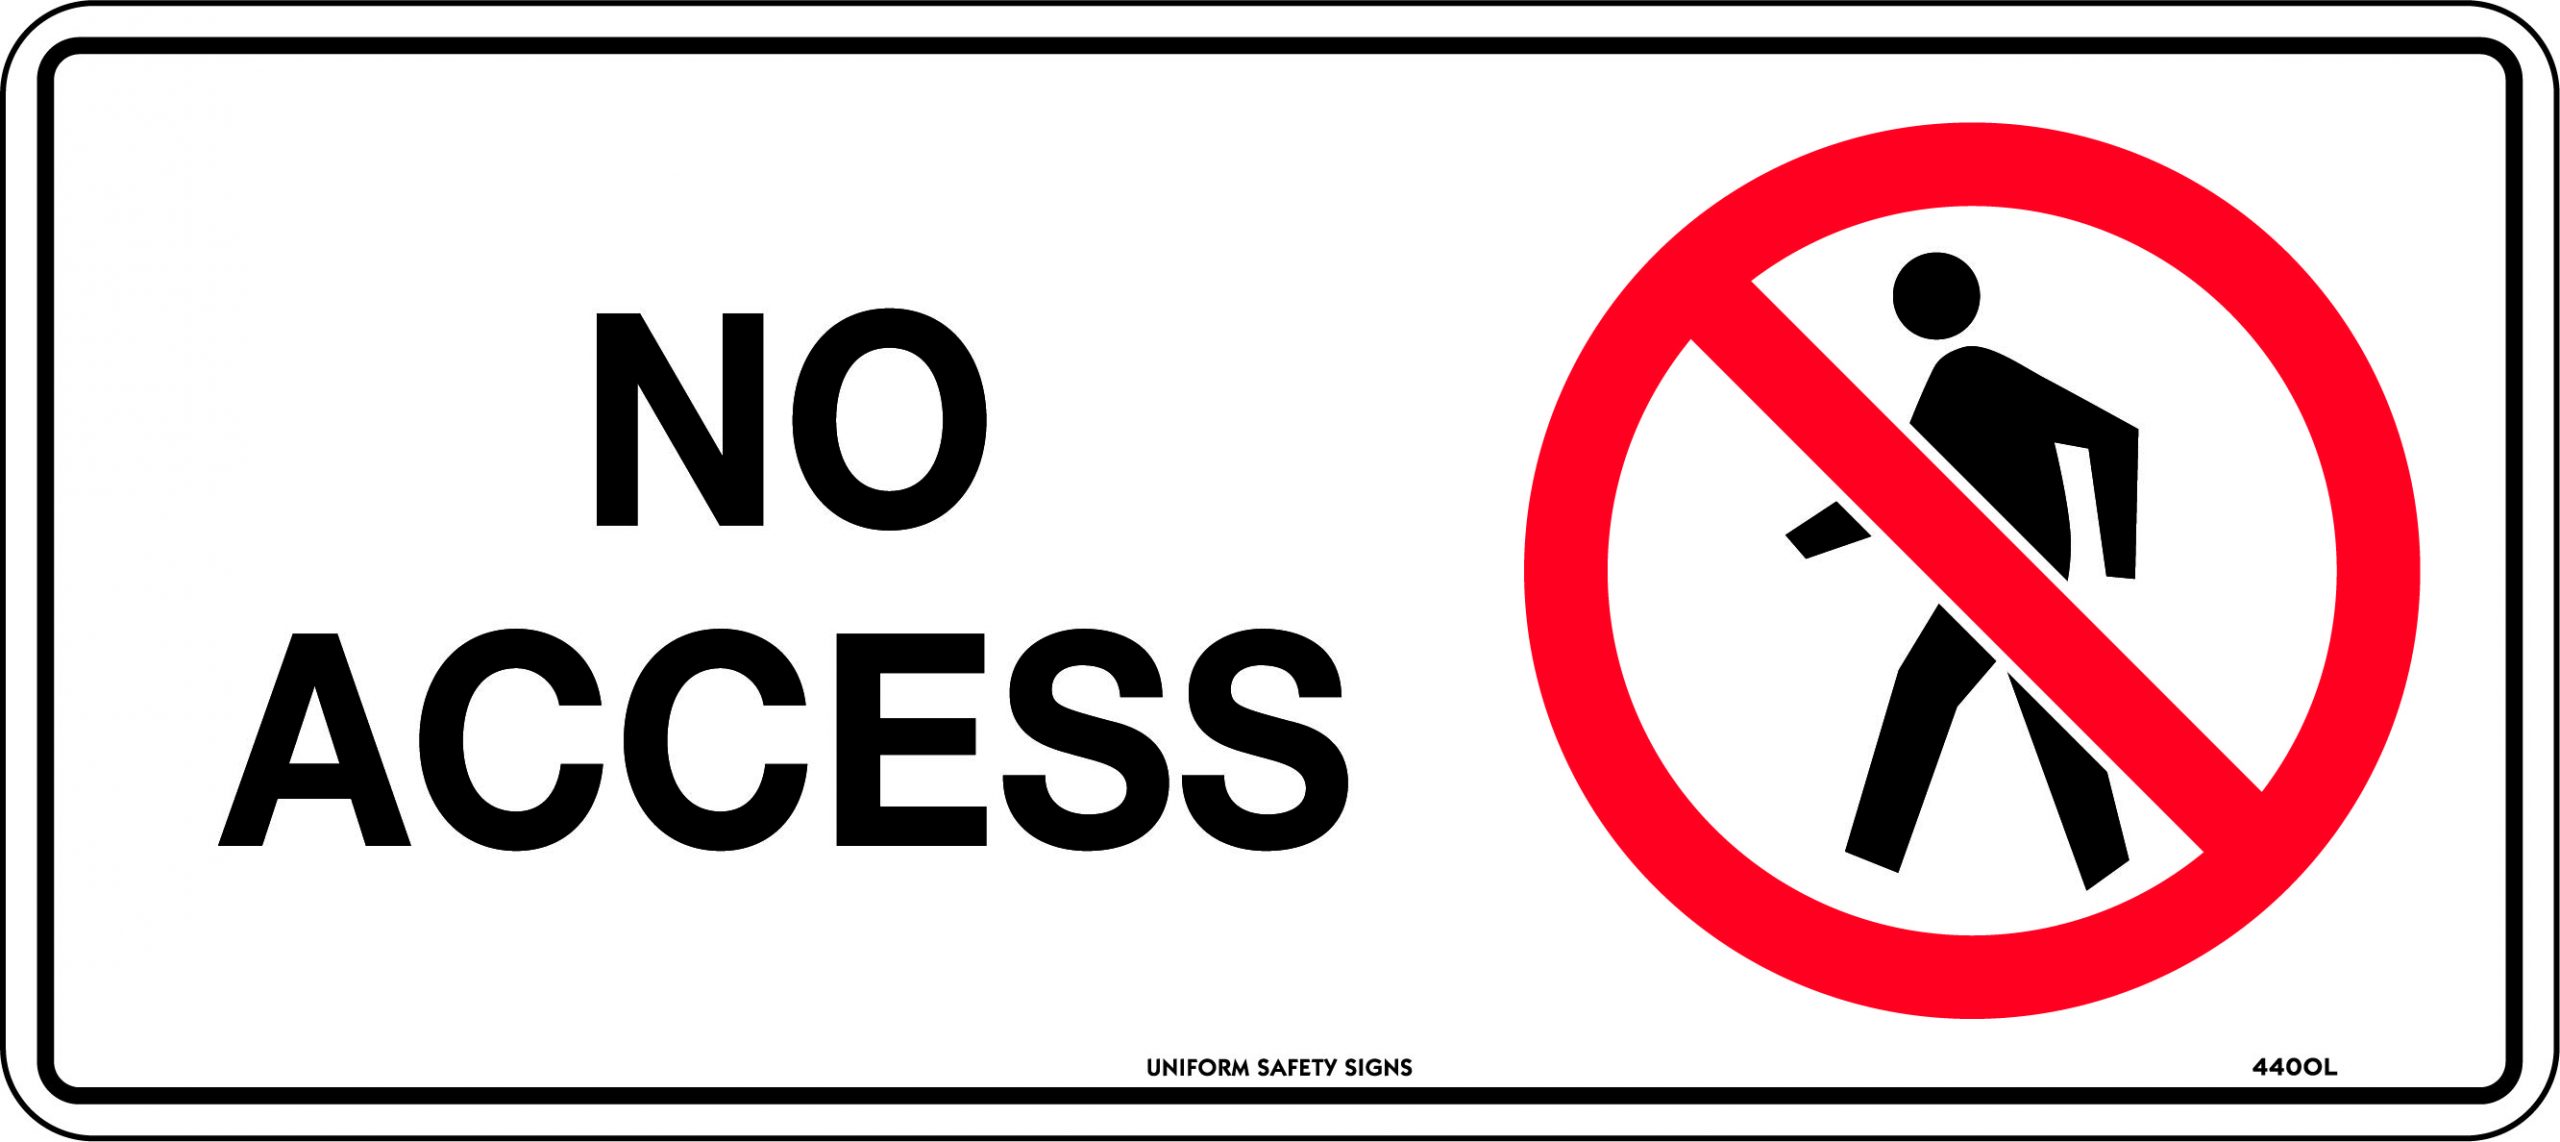 Access rejected. No access. No Safety signs. Safety signs Prohibition. Access allowed.